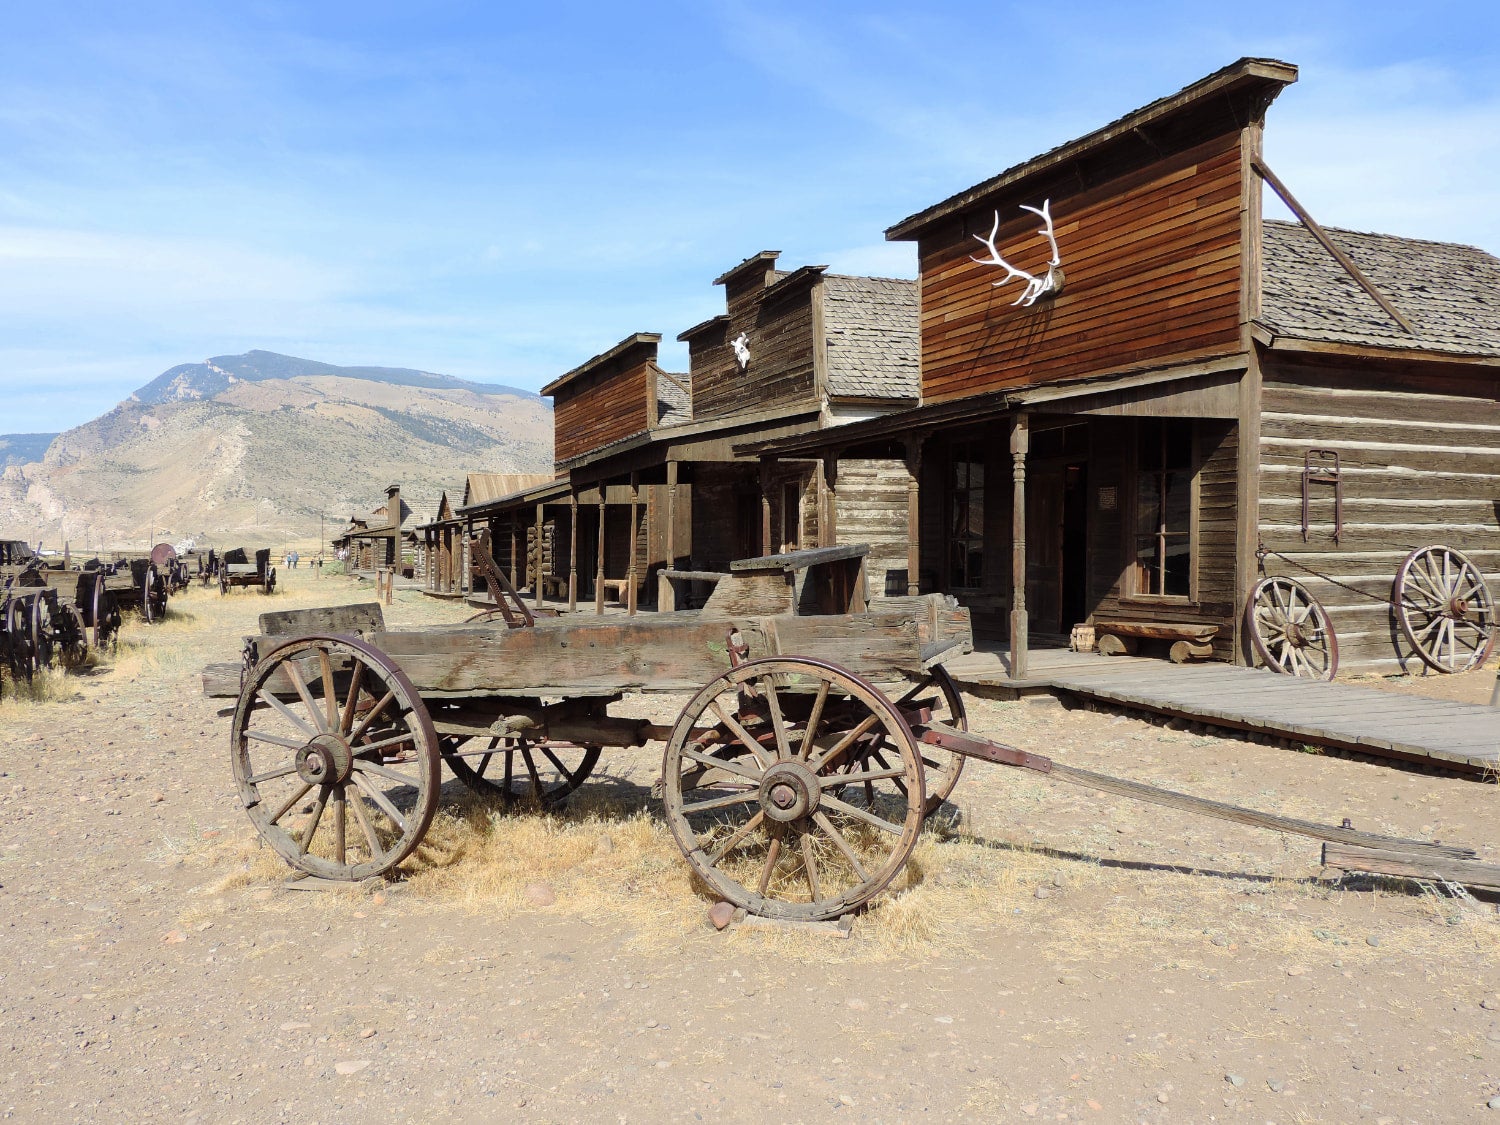 Wagon in front of old and rustic building in Cody, Wyoming